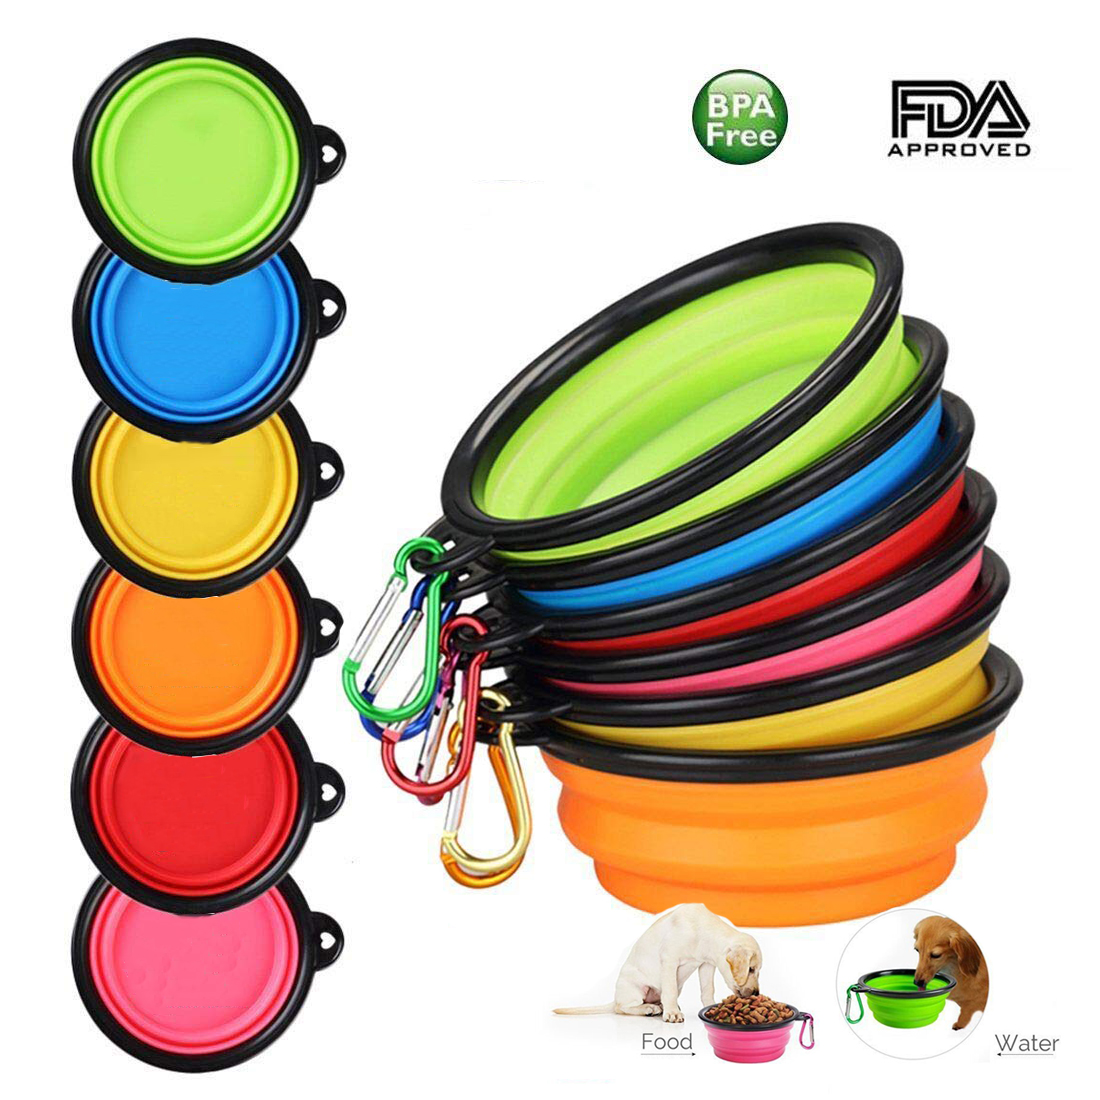 Pet Bowl Folding Silicone Portable Travel Bowl Collapsible Outdoor Feeder Water Bowl For Small Medium Dogs Cat Pet Accessories